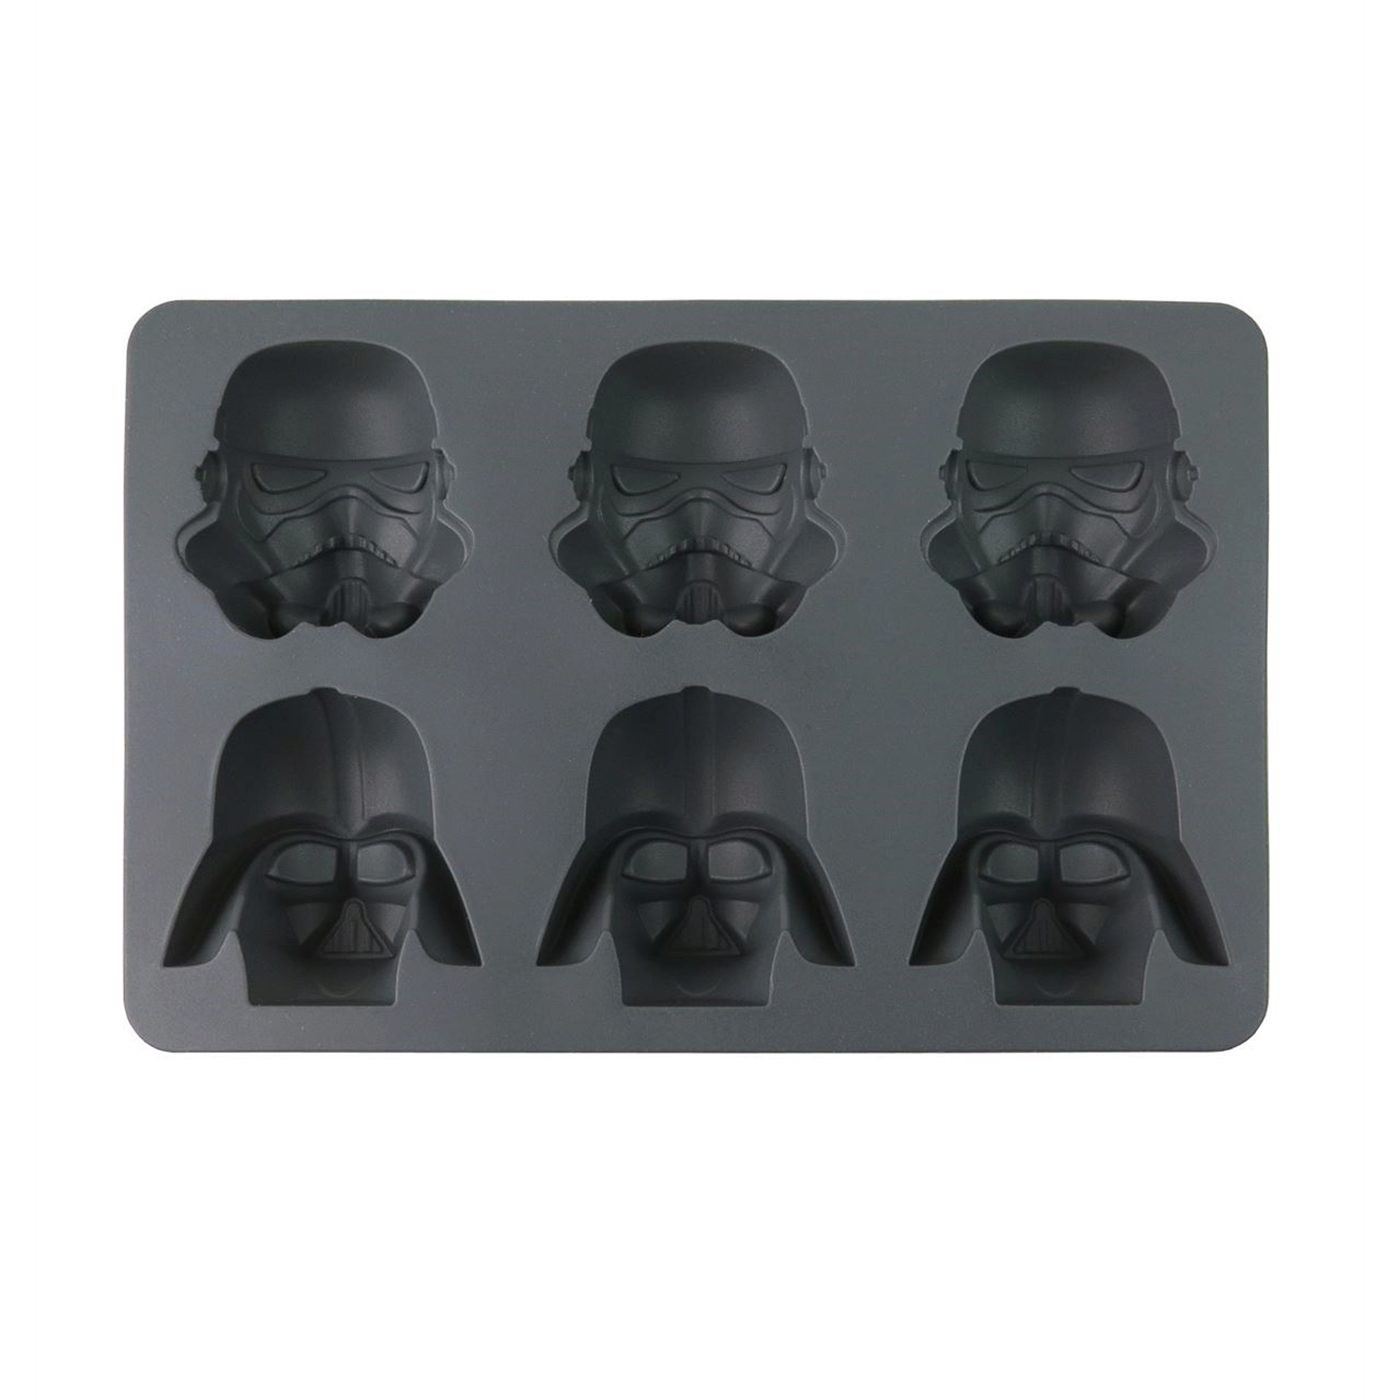 Star Wars Darth Vader & Stormtroopers Ice Cube Tray